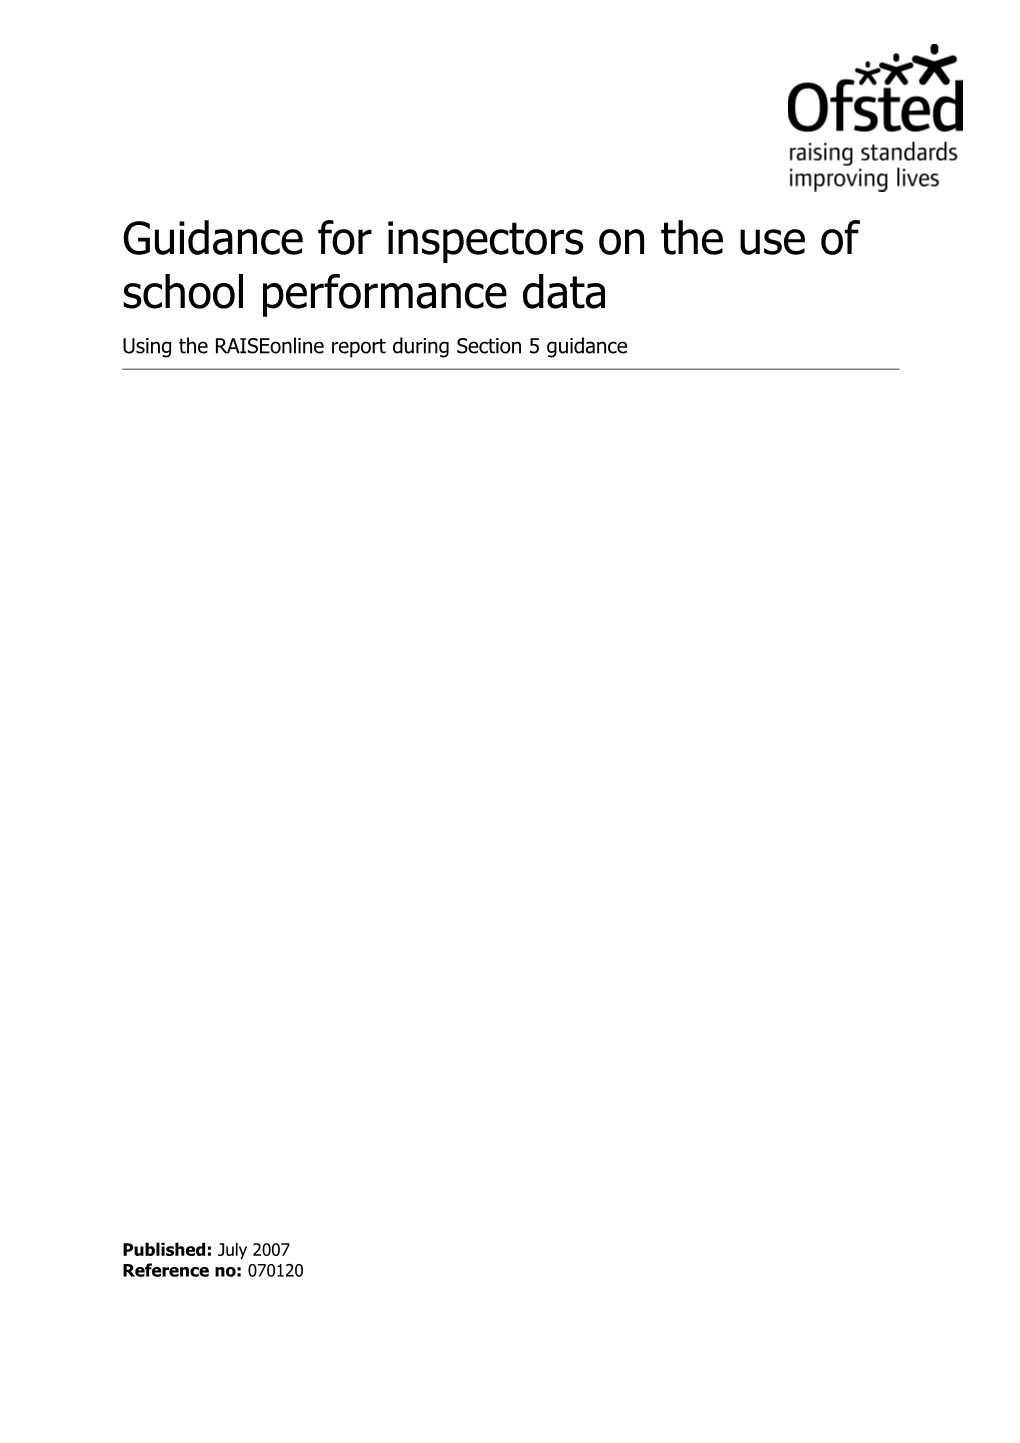 Definitions Taken from the Common Inspection Framework